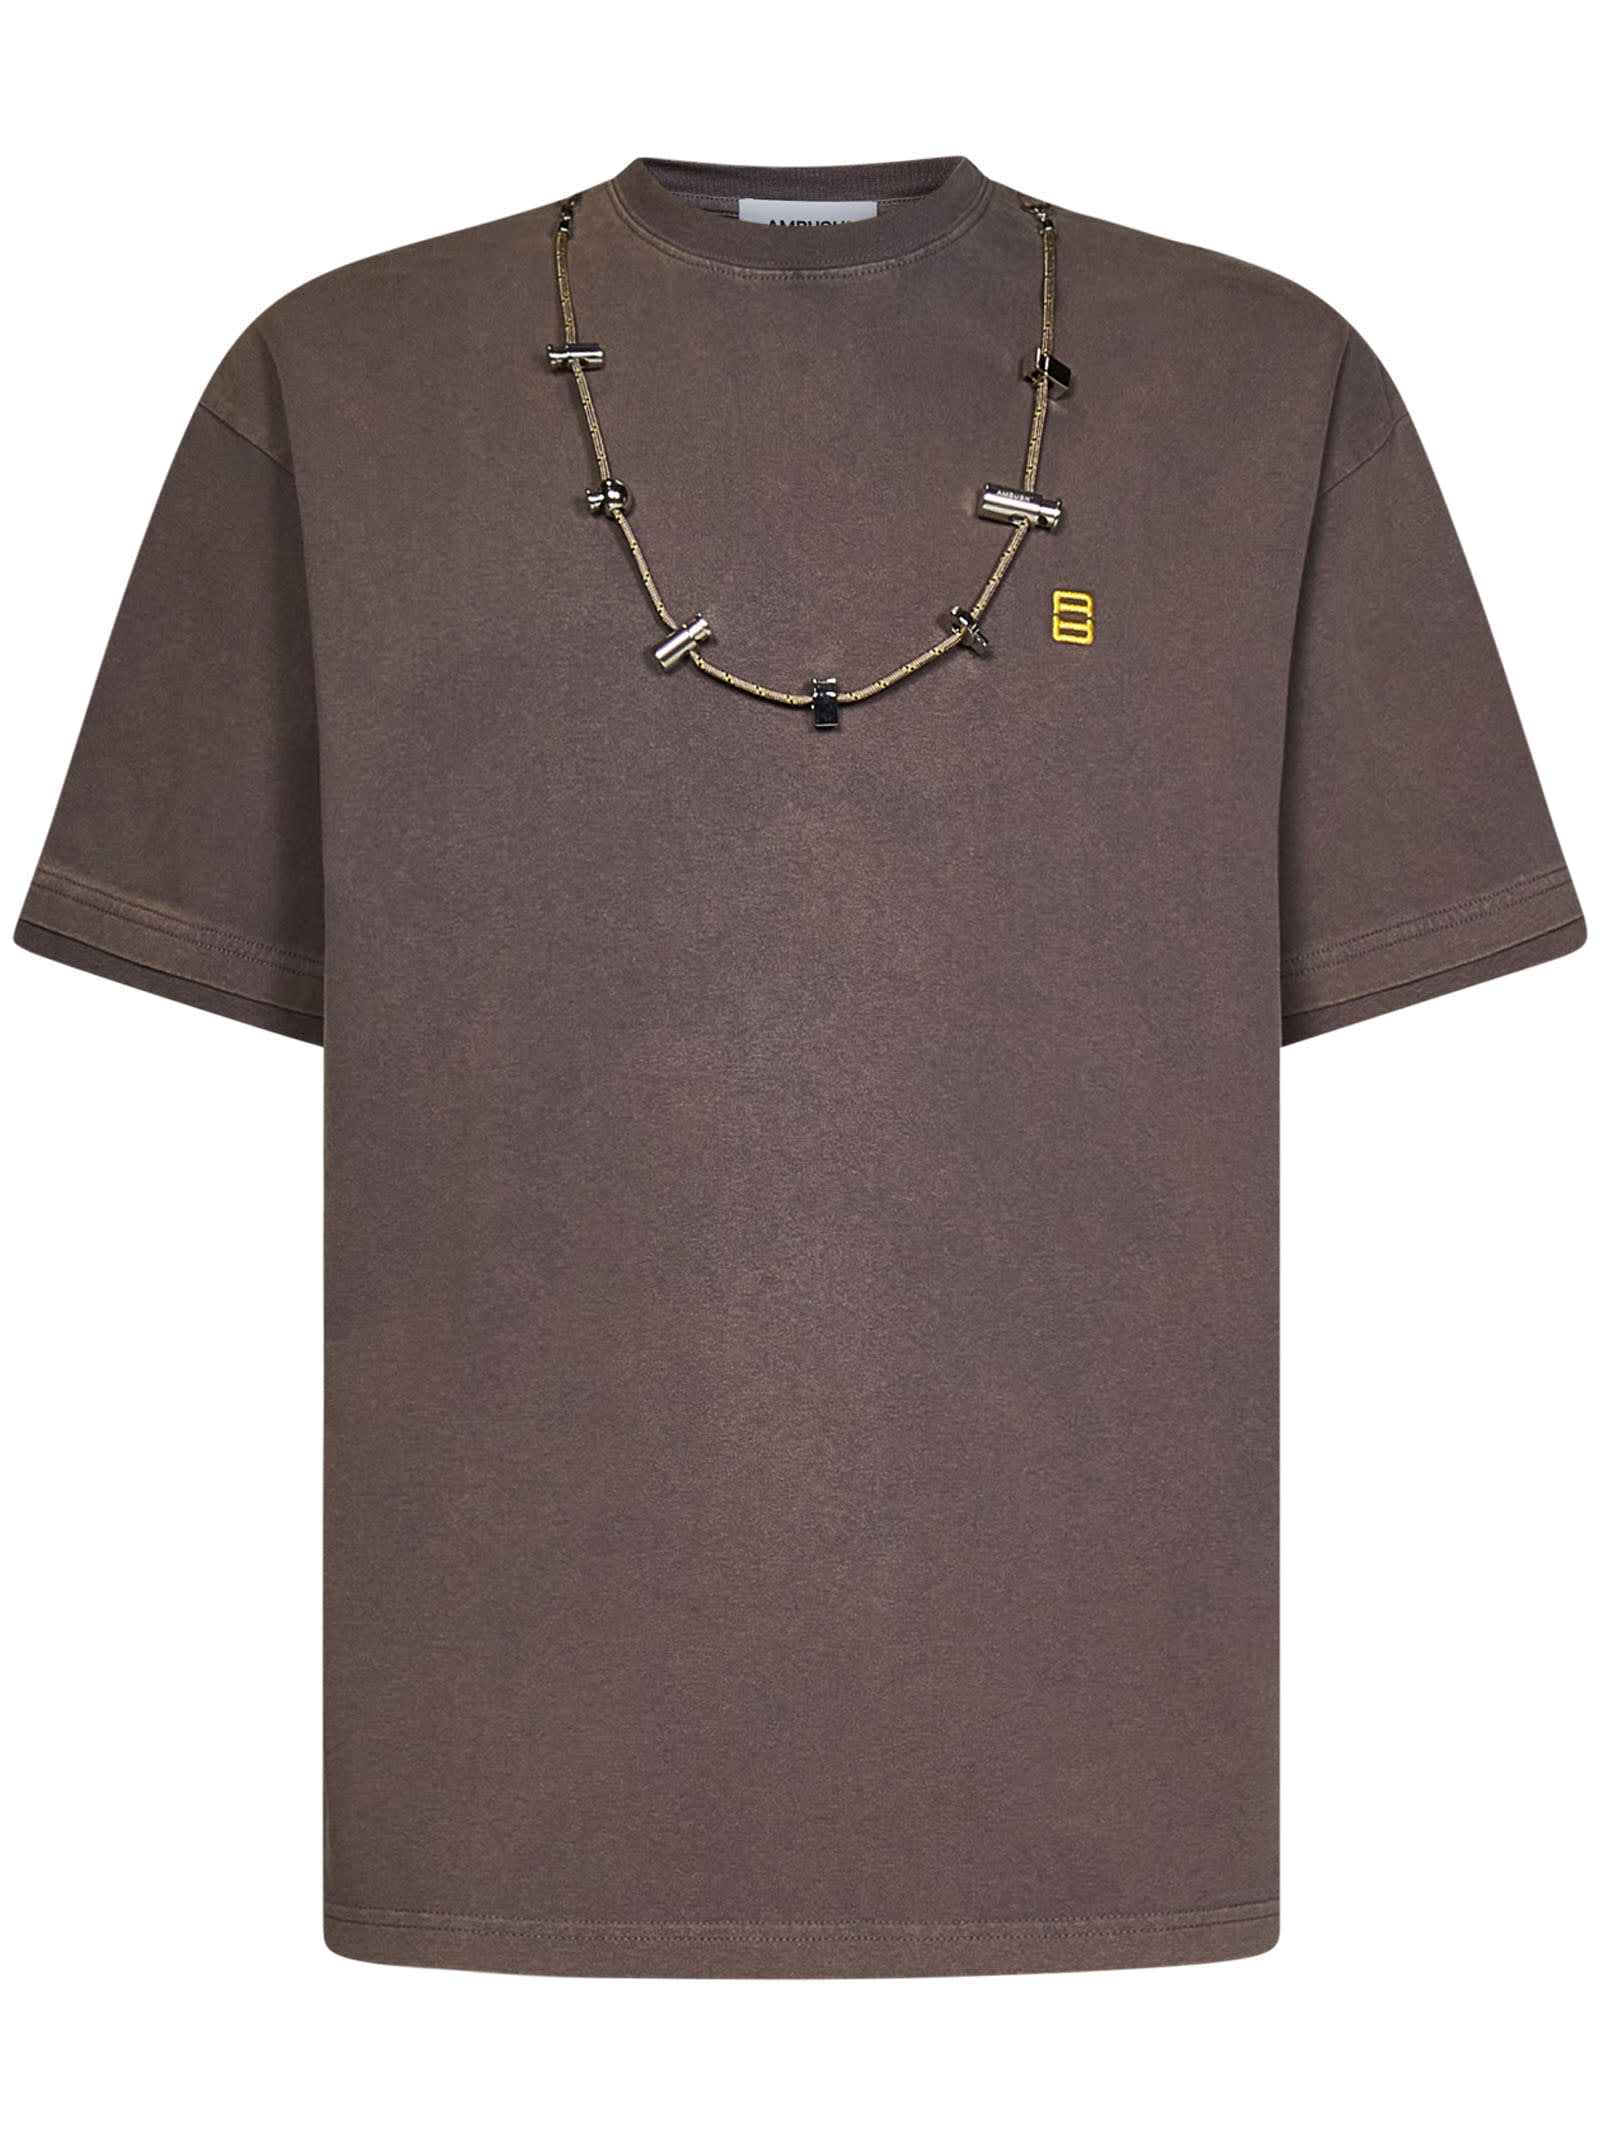 Ambush Stoppers T-shirt In Brown